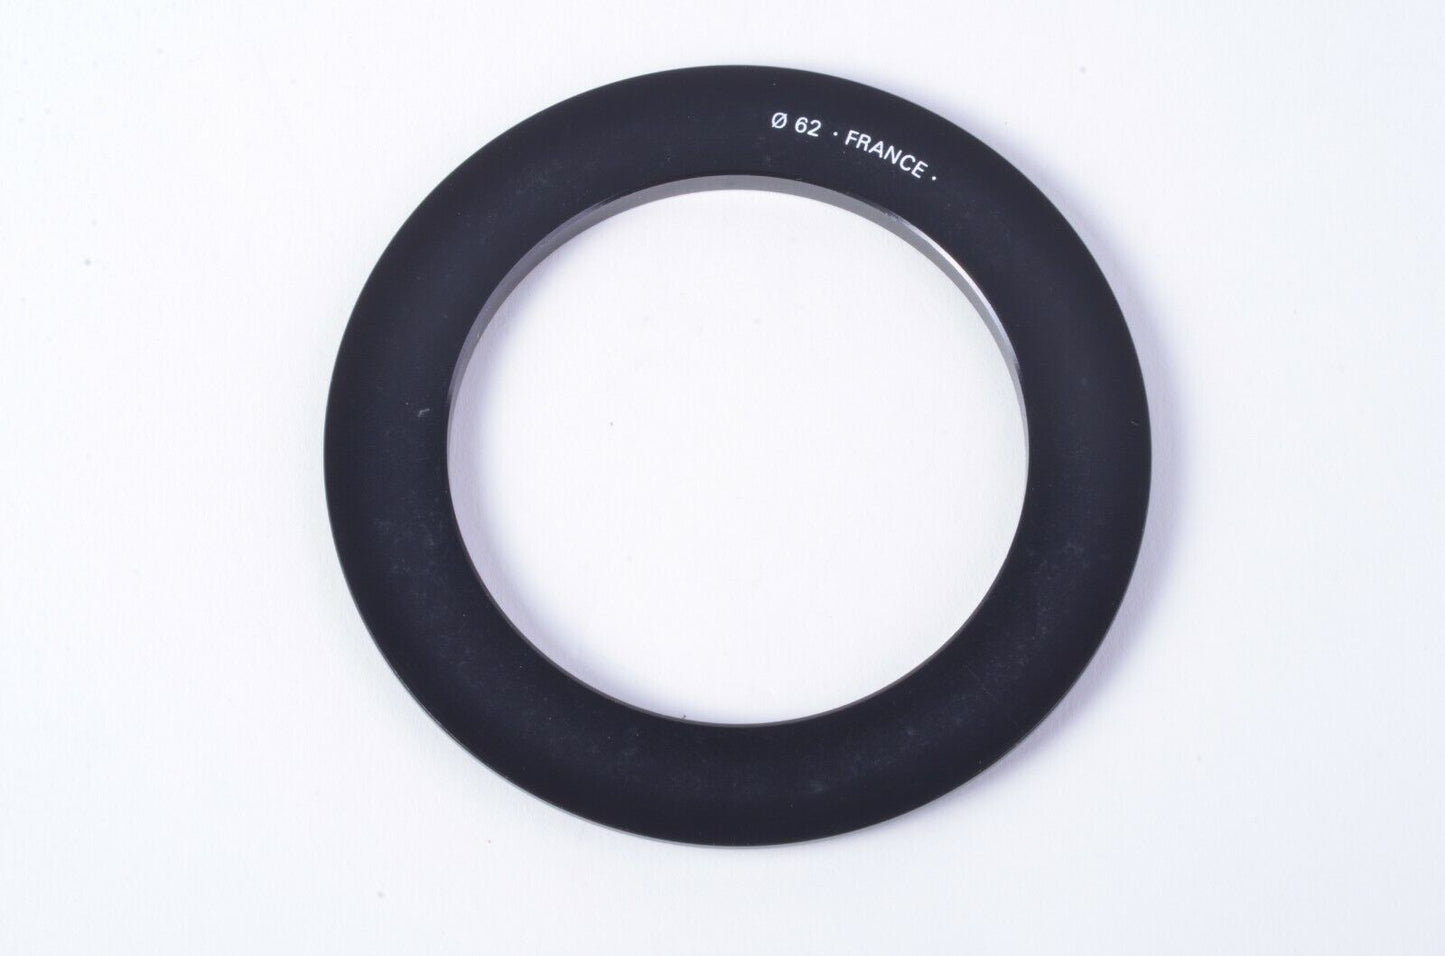 EXC++ GENUINE COKIN P SERIES 62mm ADAPTER RING, MADE IN FRANCE